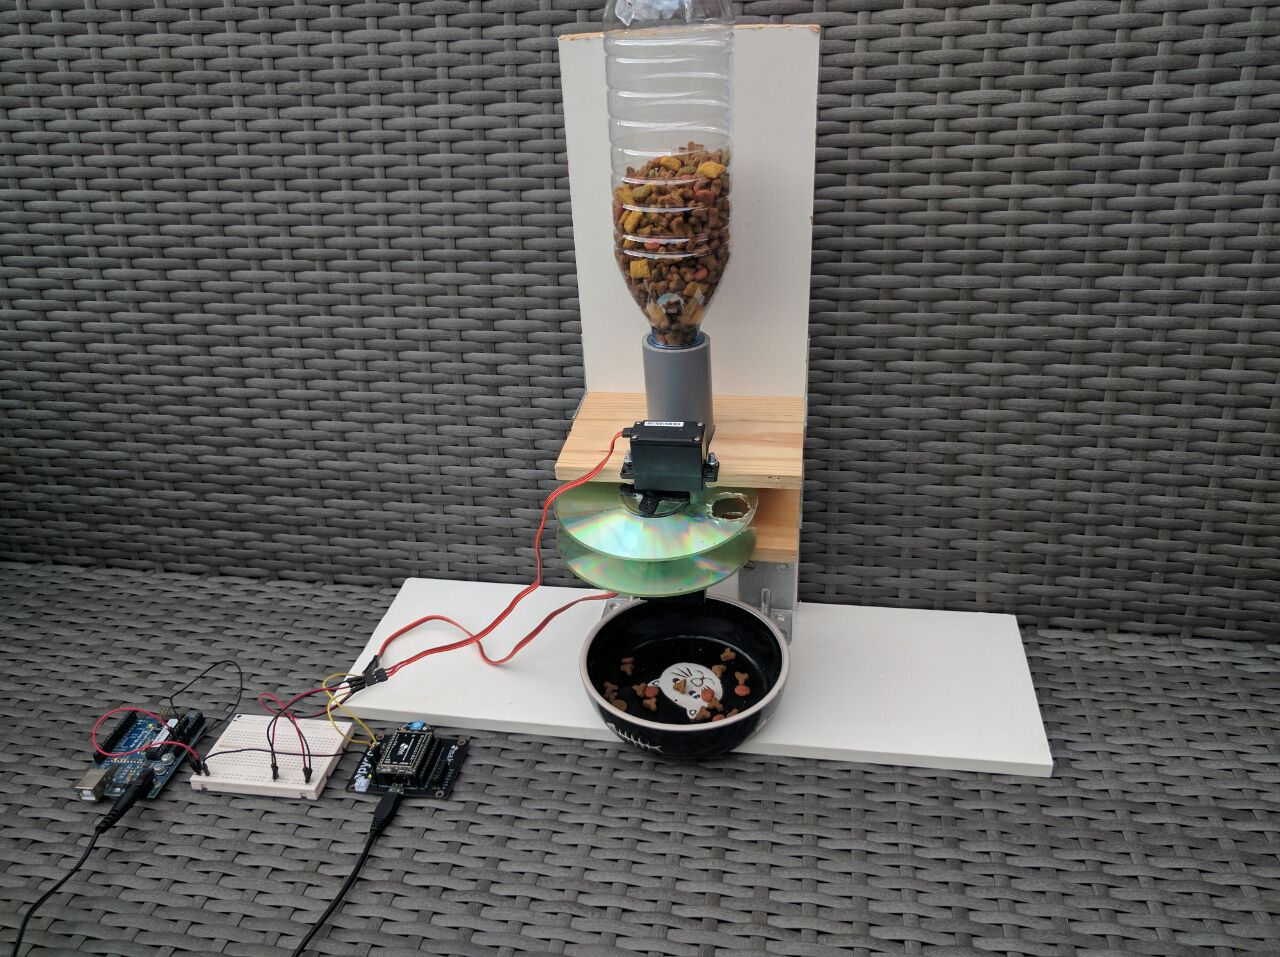 Makeshift food hopper with dispensing mechanism on top of a cat bowl. Controlled by a WiPy and Arduino through a breadboard.